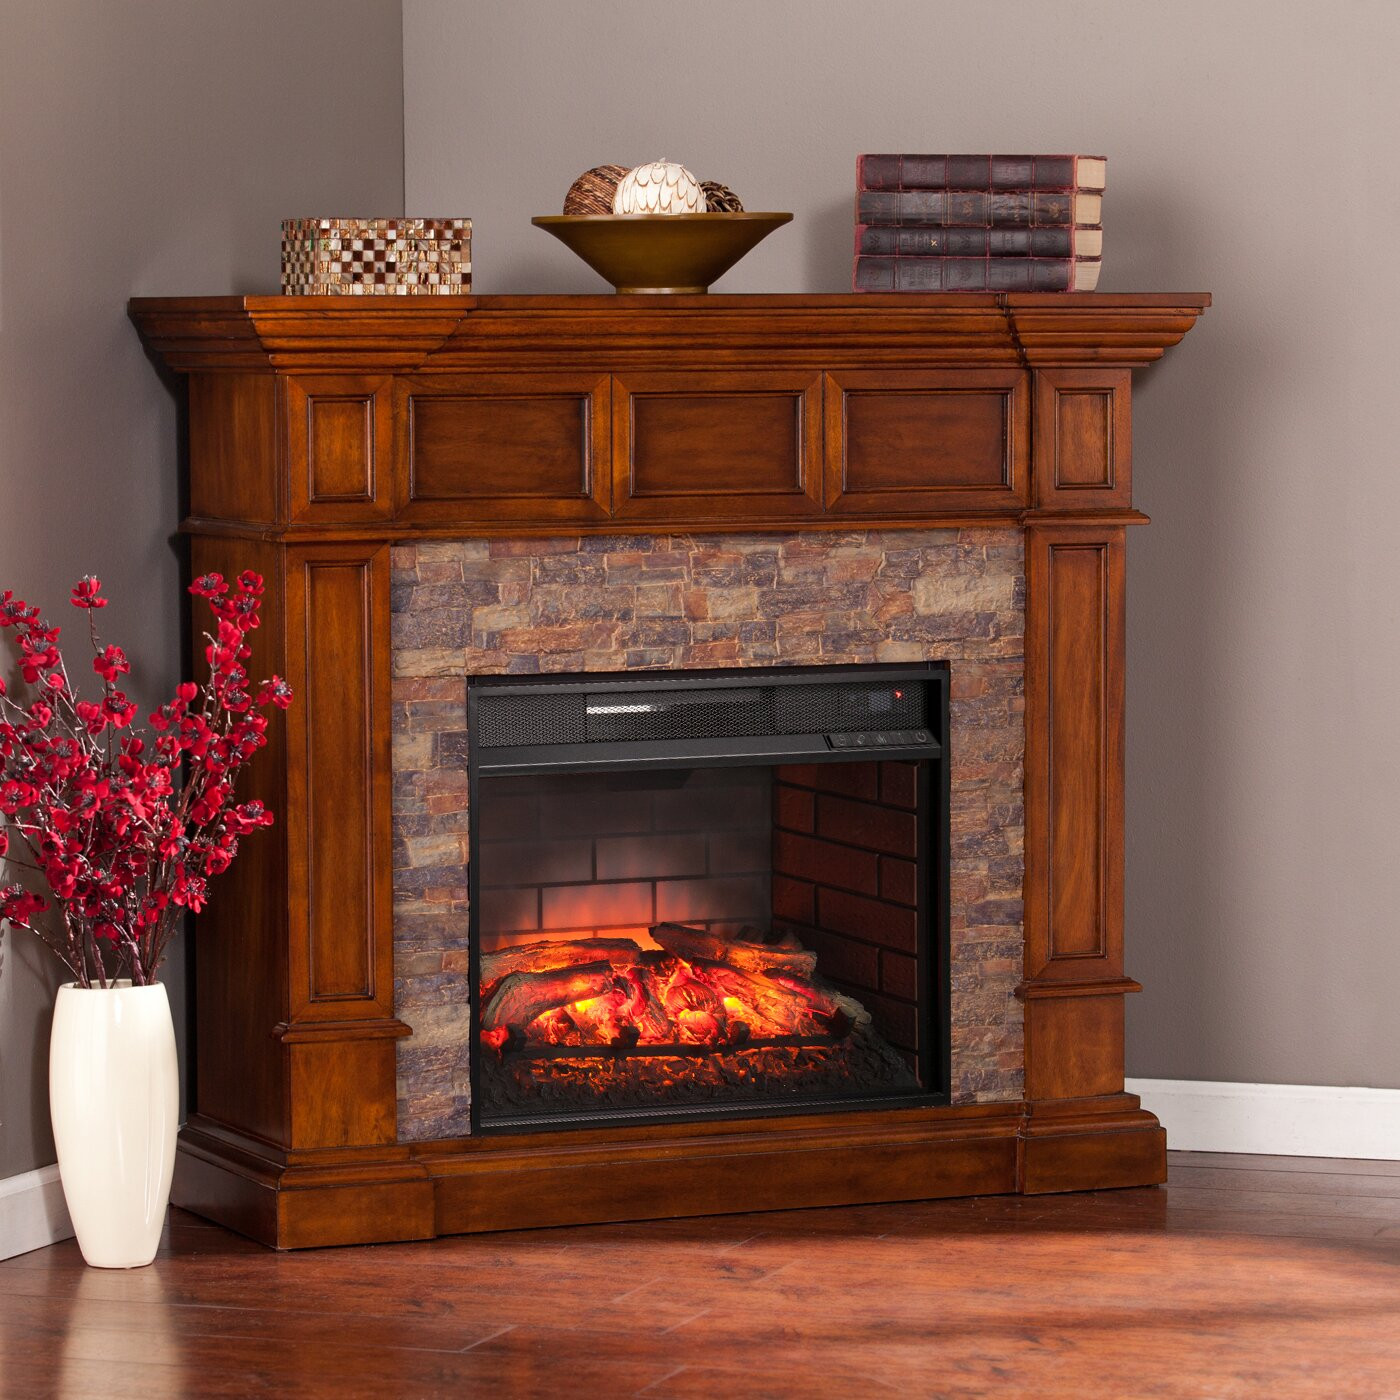 Corner Electric Fireplace Lowes
 Wildon Home Frazier Corner Convertible Infrared Electric